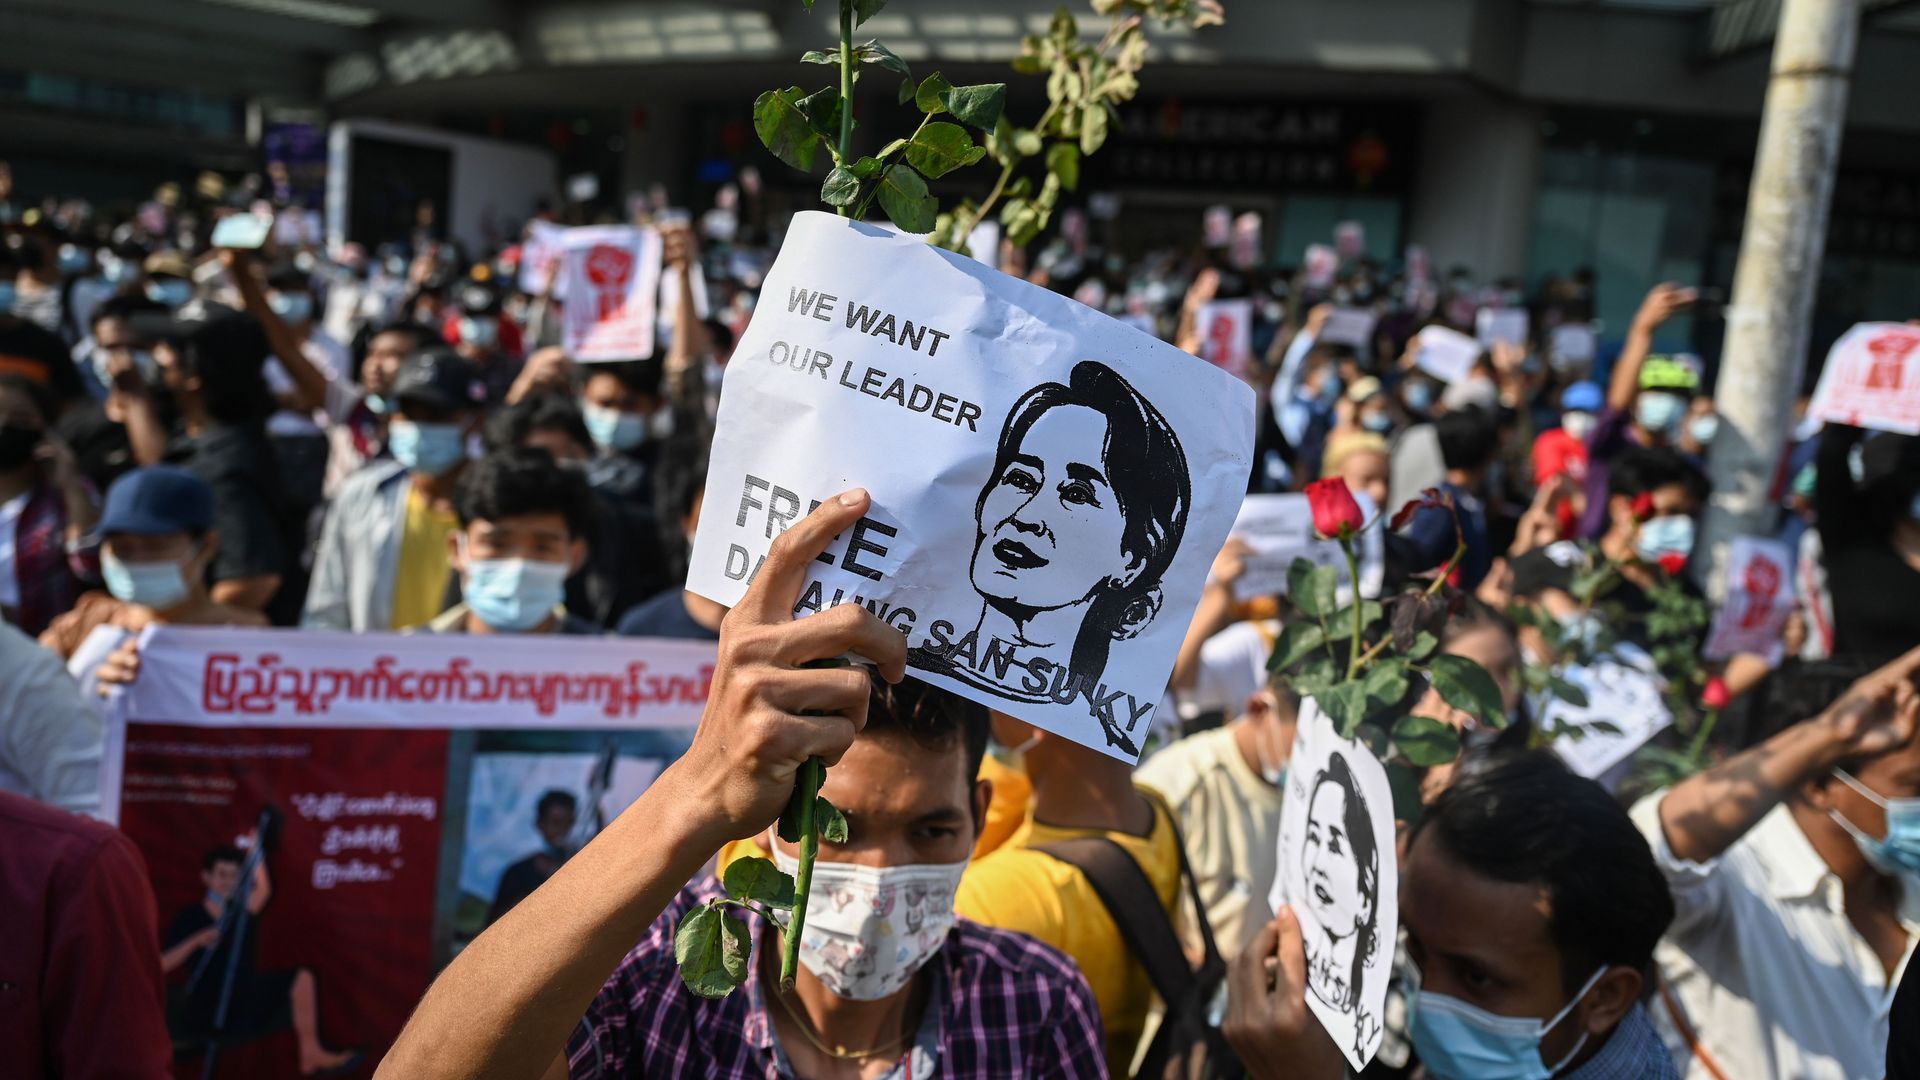 A protester holds up a sign calling for the release of detained civilian leader Aung San Suu Kyi during a demonstration against the military coup in Yangon on February 7